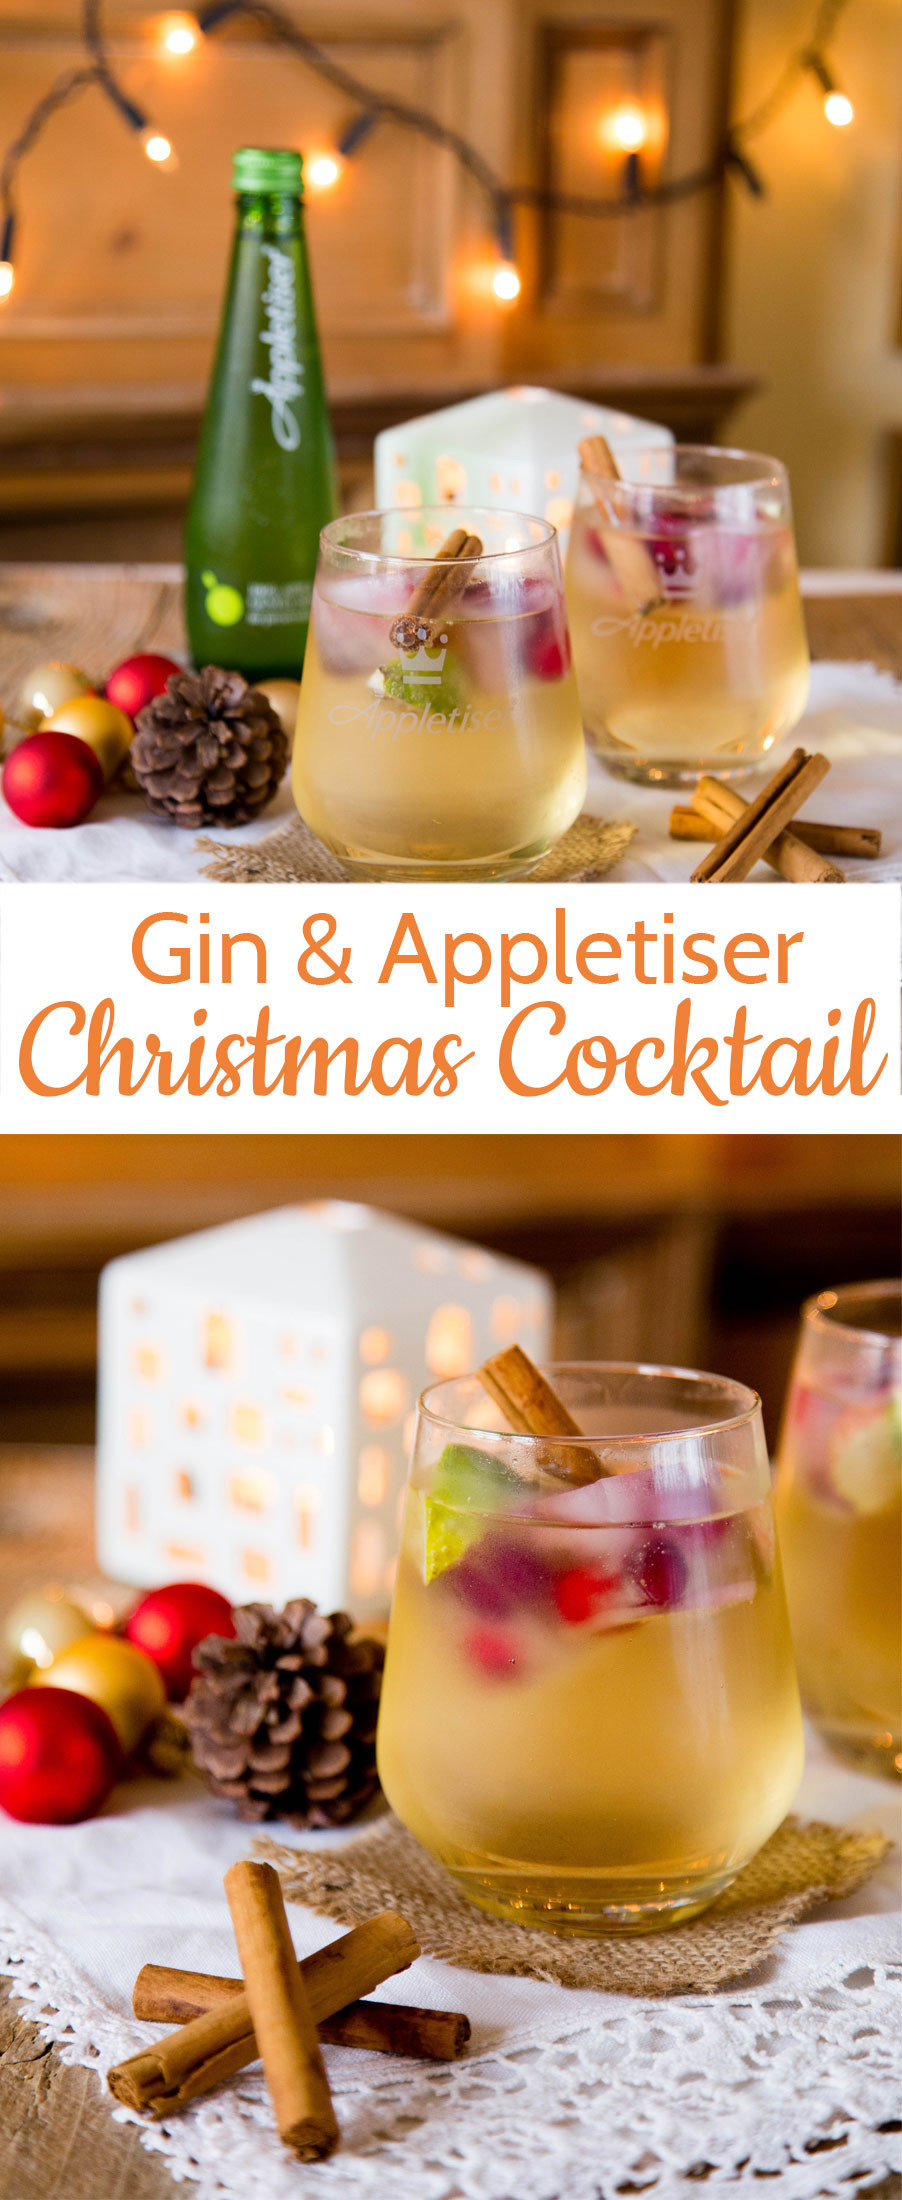 Holiday Gin Drinks
 Gin & Appletiser a refreshing Christmas Cocktail